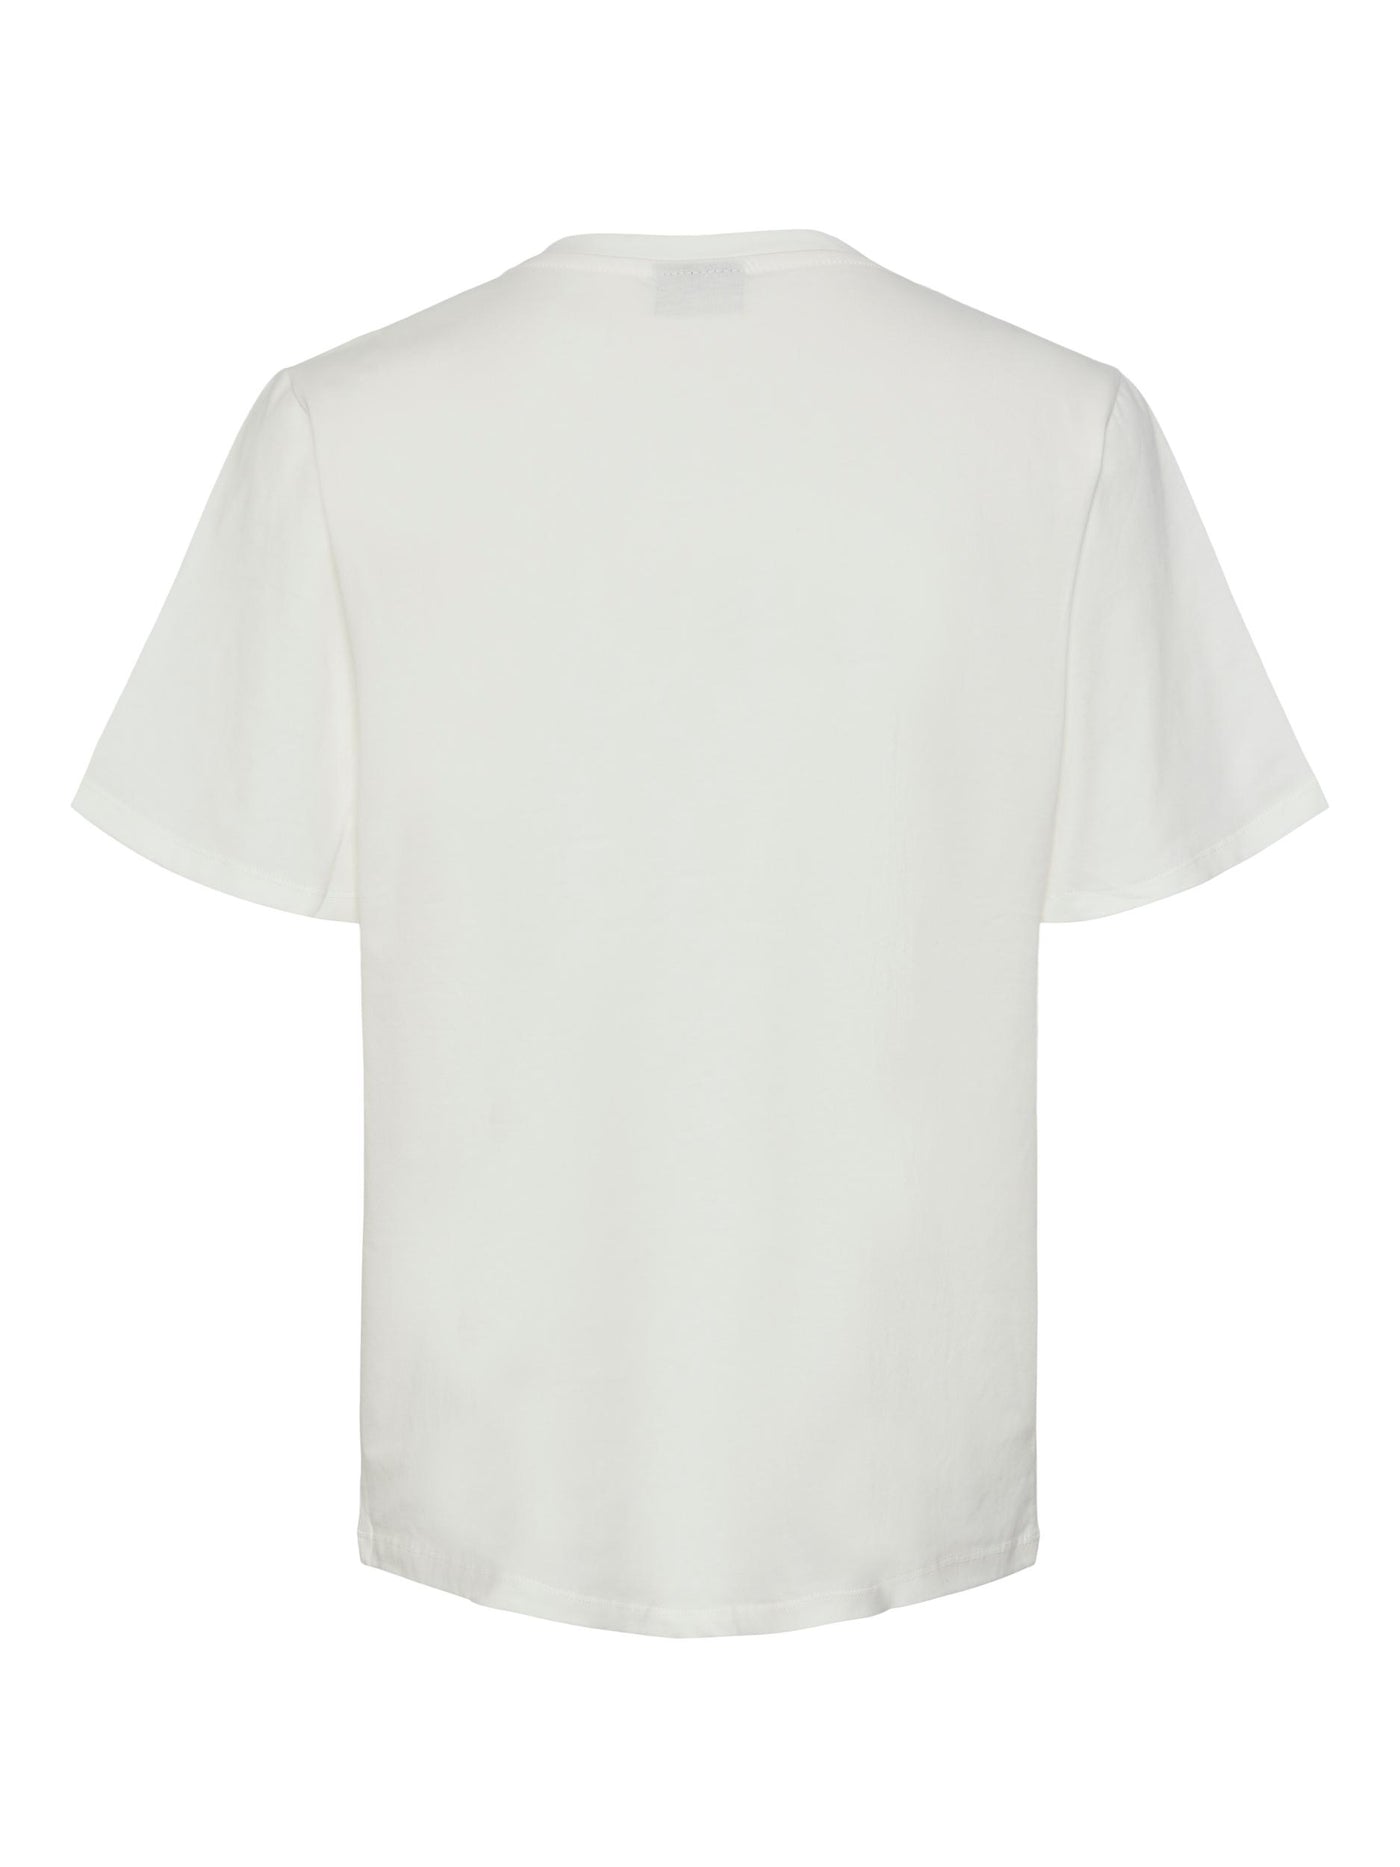 White cotton embroidered t-shirt